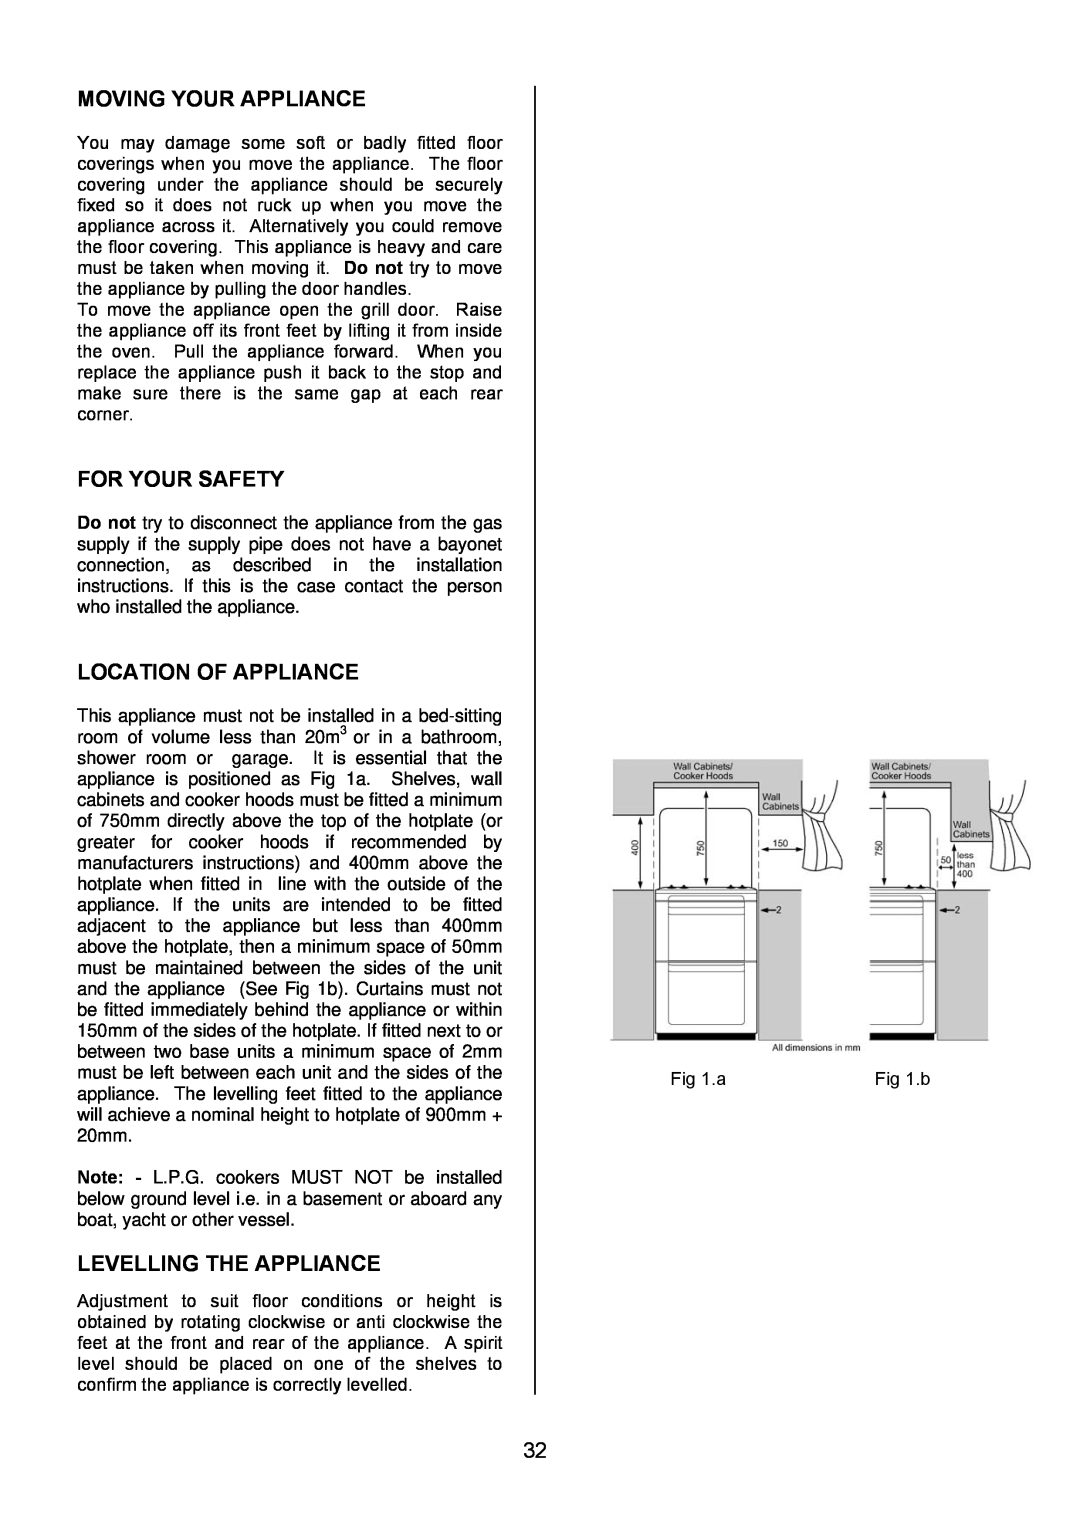 Electrolux EKG6049 user manual Moving Your Appliance, For Your Safety, Location Of Appliance, Levelling The Appliance 